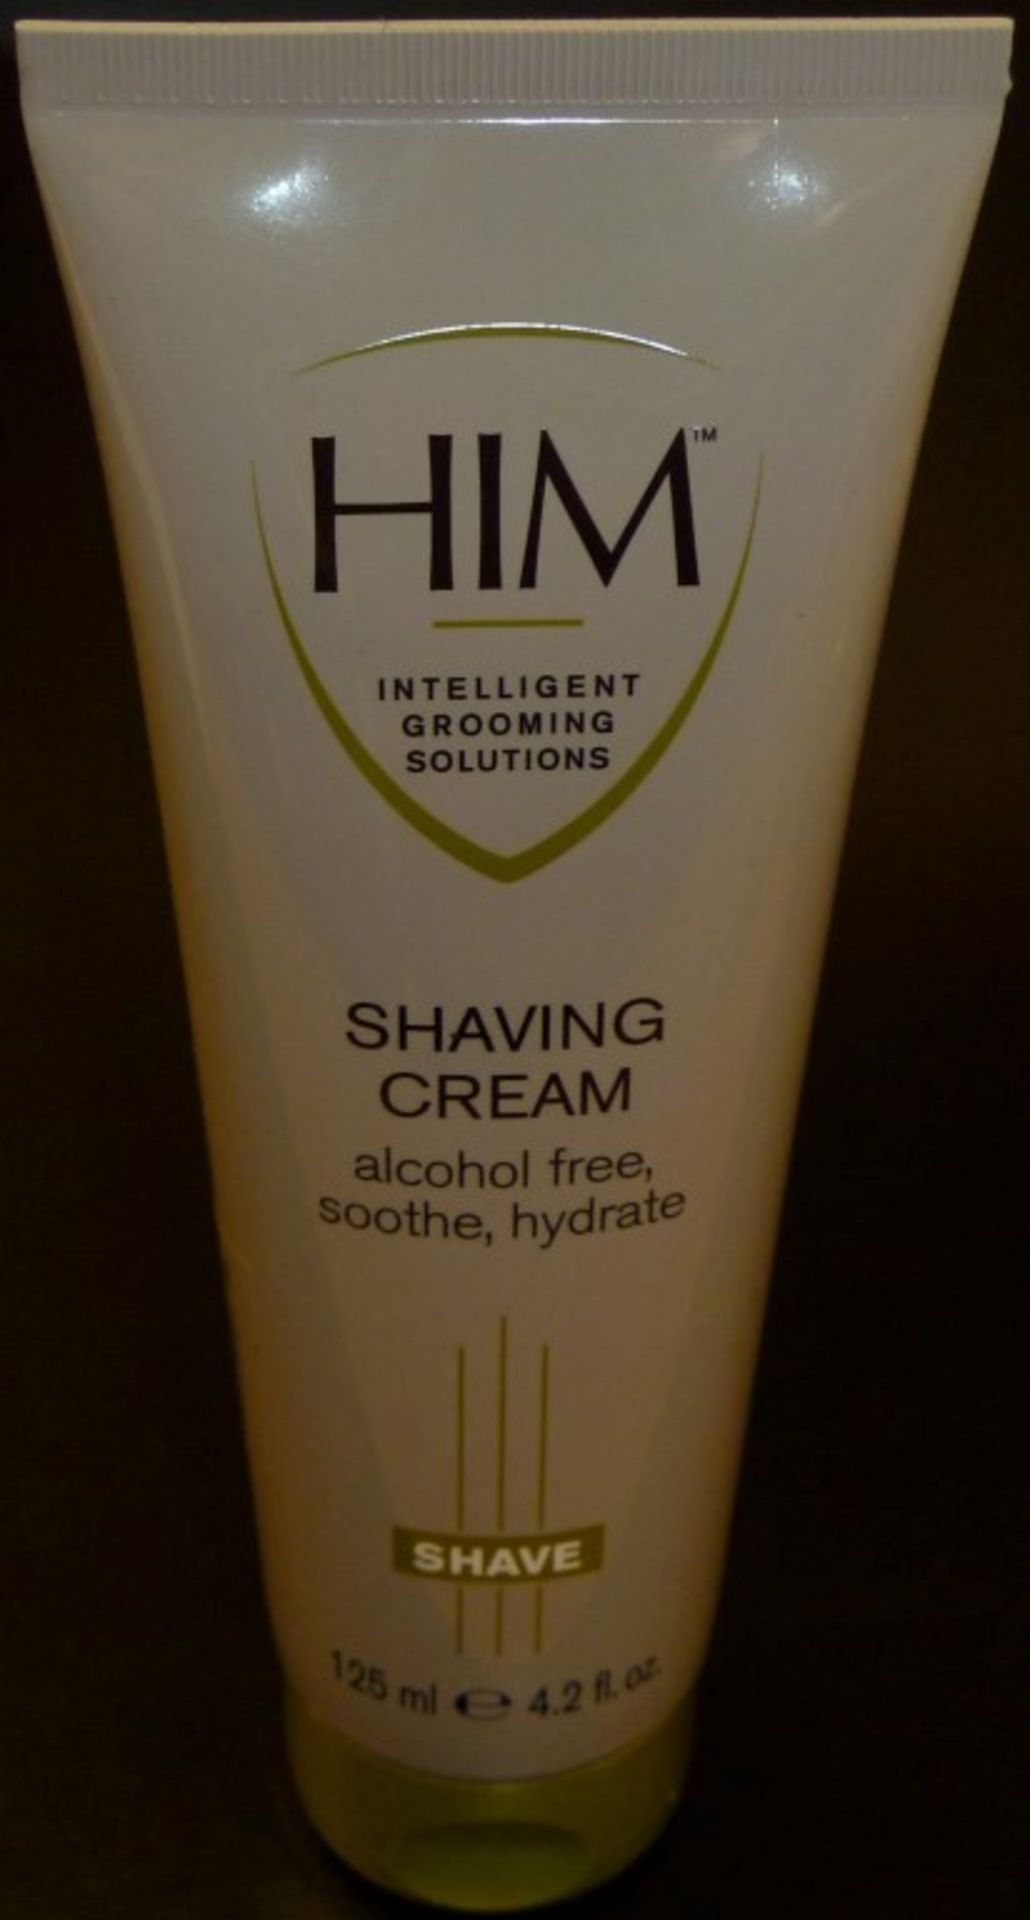 20 x HIM Intelligent Grooming Solutions - 125ml SHAVING CREAM - Brand New Stock - Alcohol Free, - Image 4 of 5